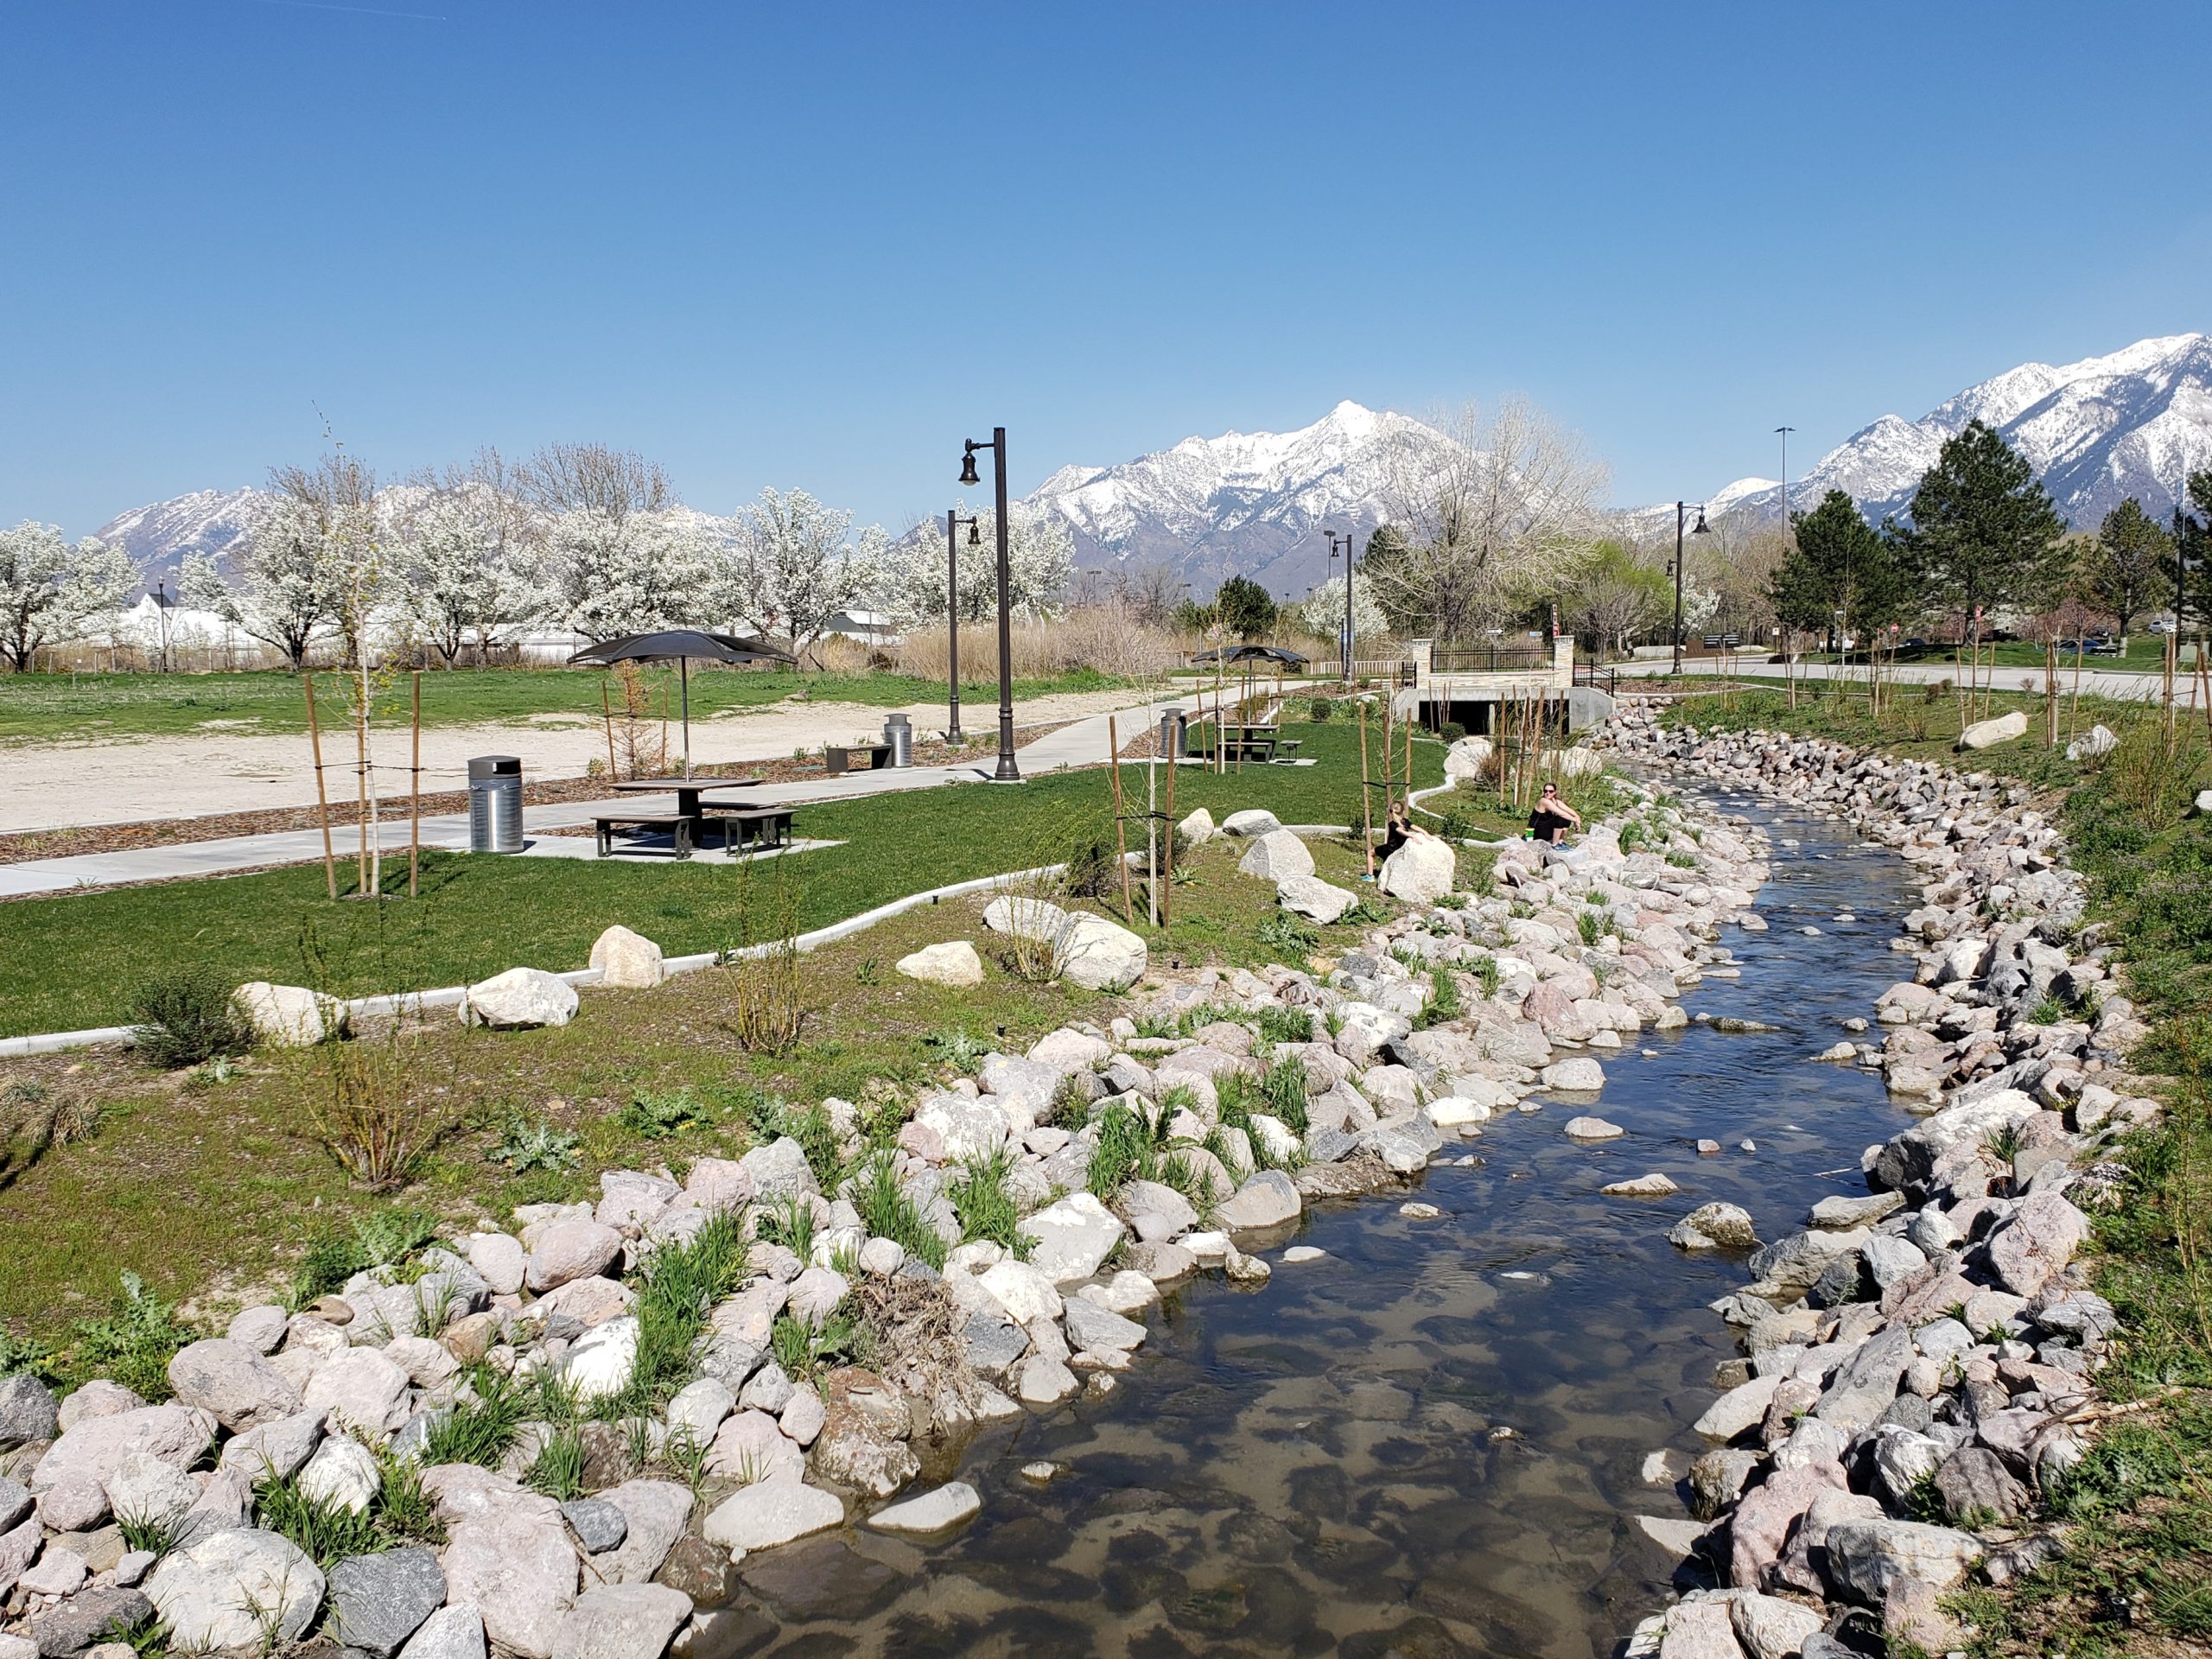 Two people sit beside the Dry Creek channel with sidewalks, tables, grass, blossoming trees, and mountains in the background.